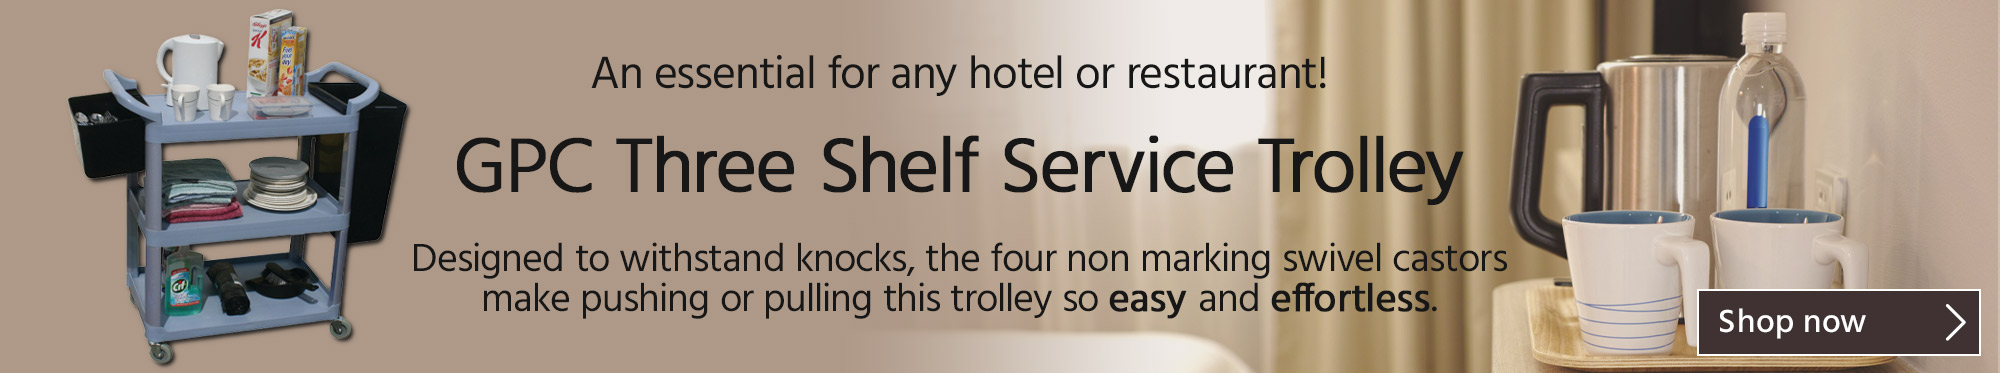 An Essential Trolley For Any Hotel or Restaurant